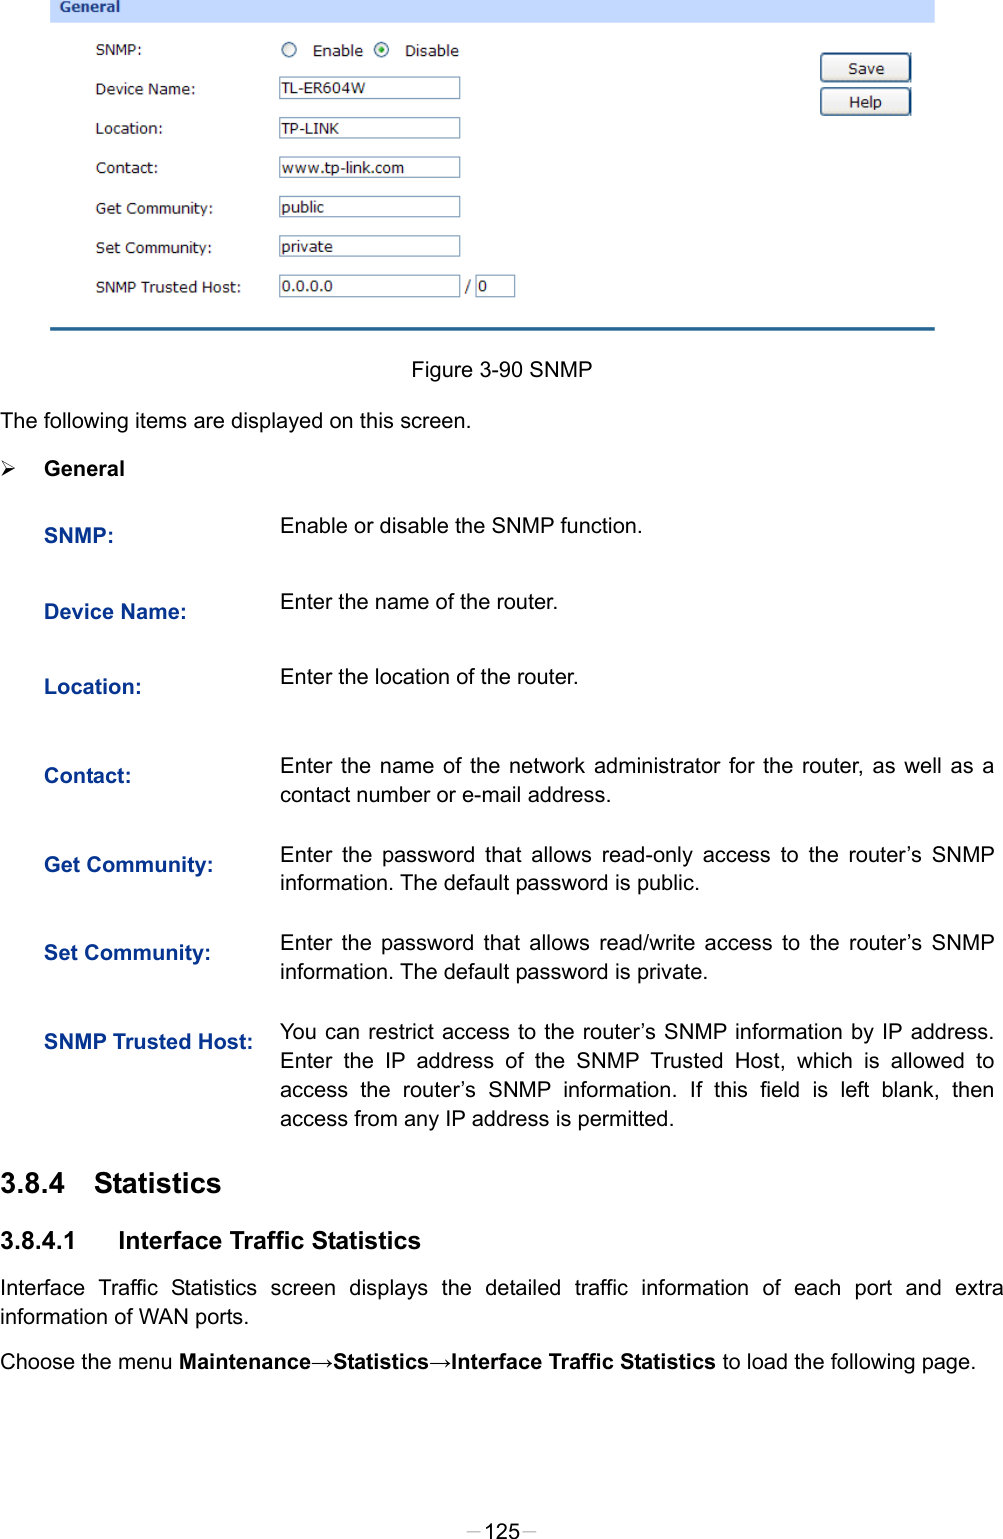   Figure 3-90 SNMP The following items are displayed on this screen.  General SNMP:  Enable or disable the SNMP function. Device Name:  Enter the name of the router. Location:  Enter the location of the router. Contact:  Enter the name of the network administrator for the router, as well as a contact number or e-mail address. Get Community:  Enter the password that allows read-only access to the router’s SNMP information. The default password is public. Set Community:  Enter the password that allows read/write access to the router’s SNMP information. The default password is private. SNMP Trusted Host:  You can restrict access to the router’s SNMP information by IP address. Enter the IP address of the SNMP Trusted Host, which is allowed to access the router’s SNMP information. If this field is left blank, then access from any IP address is permitted. 3.8.4 Statistics 3.8.4.1 Interface Traffic Statistics Interface Traffic Statistics screen displays the detailed traffic information of each port and extra information of WAN ports. Choose the menu Maintenance→Statistics→Interface Traffic Statistics to load the following page. -125- 